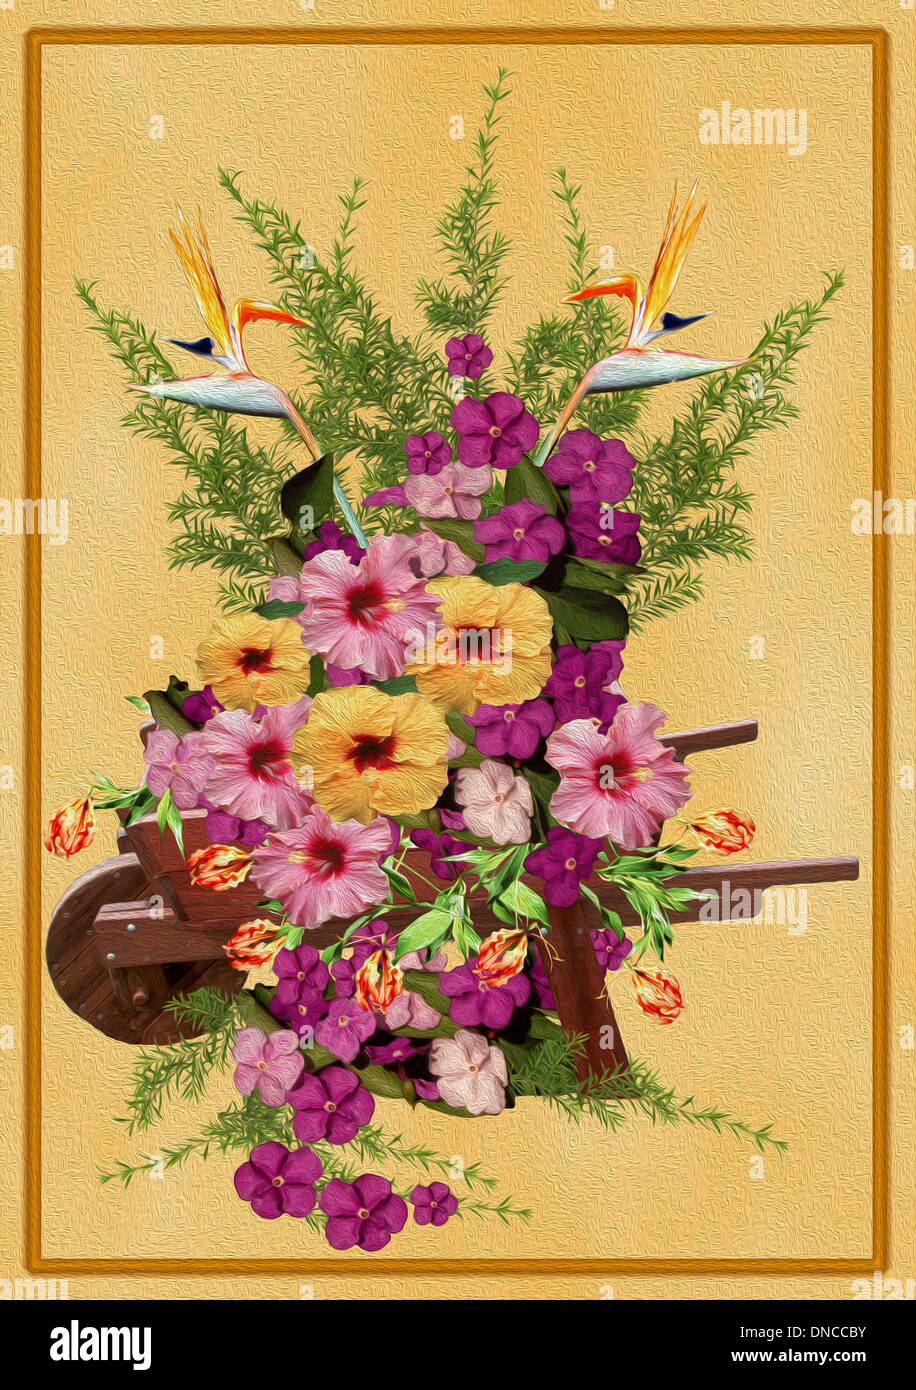 Unique digital floral art design, collage of brightly coloured hibiscus flowers and lacy foliage spilling out of wooden wheelbarrow on apricot backgrd Stock Photo